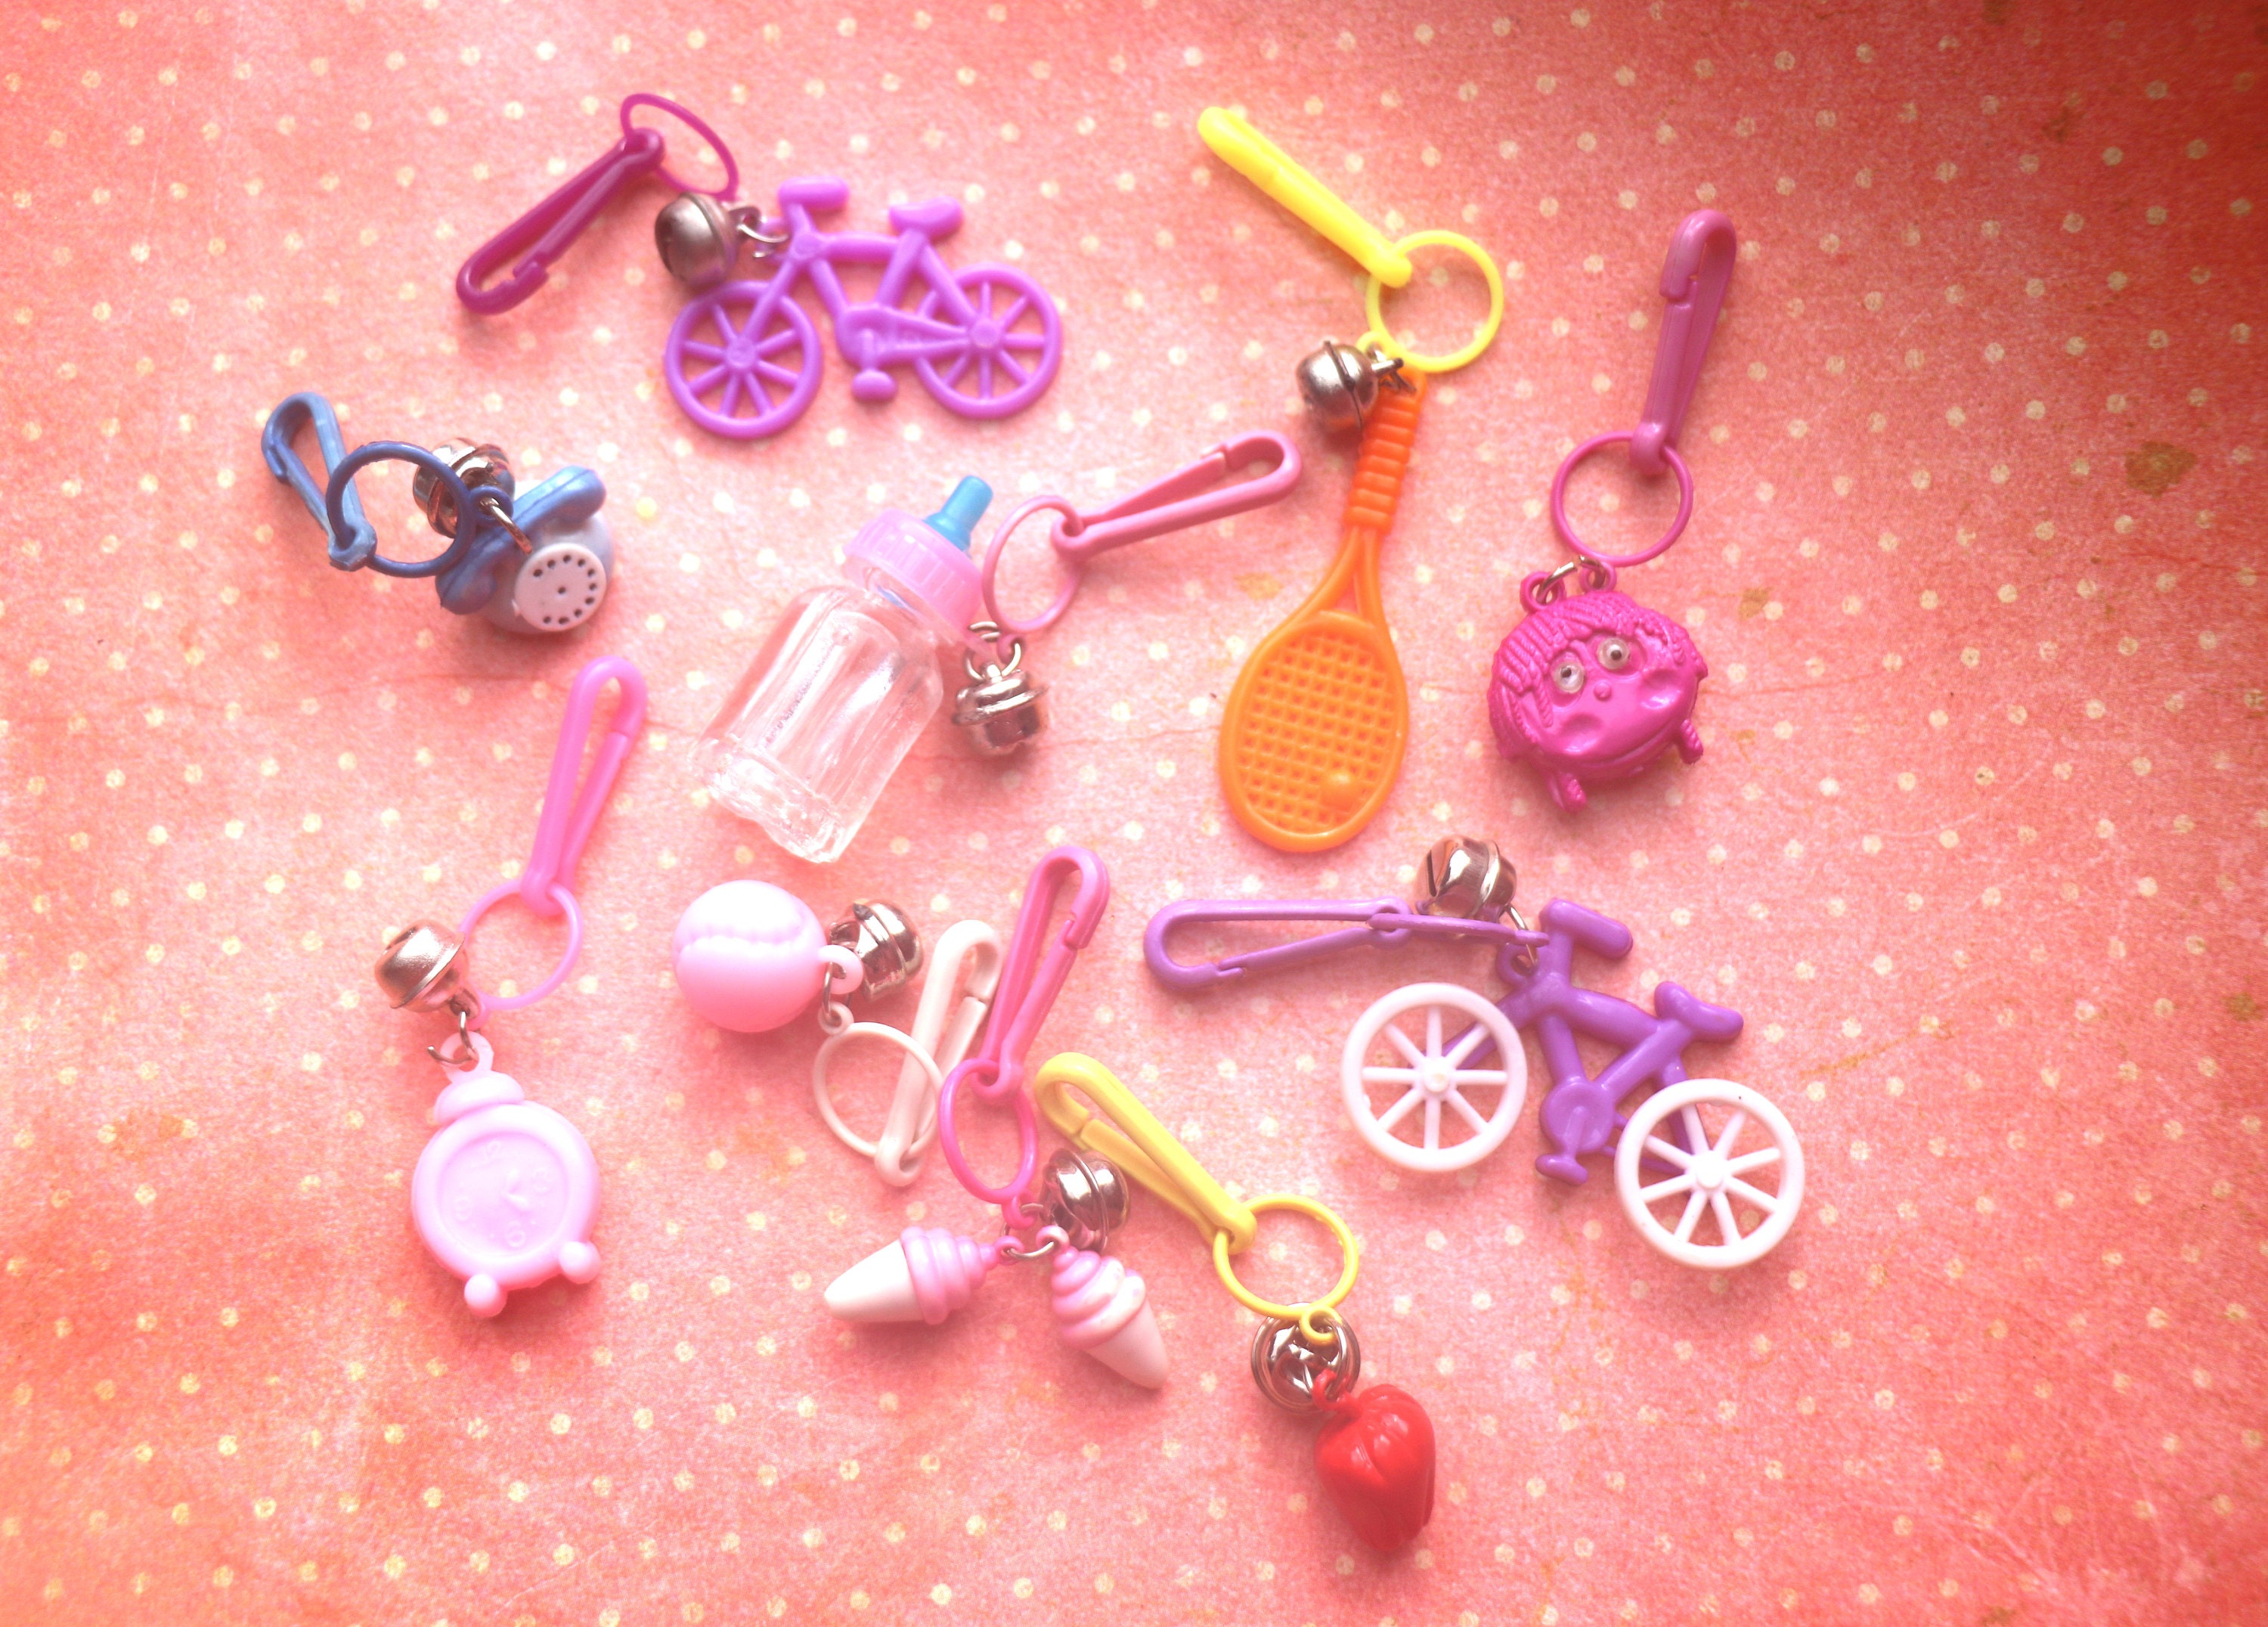 Vintage plastic figural clip-on hairbrush charms keyrings keychain —